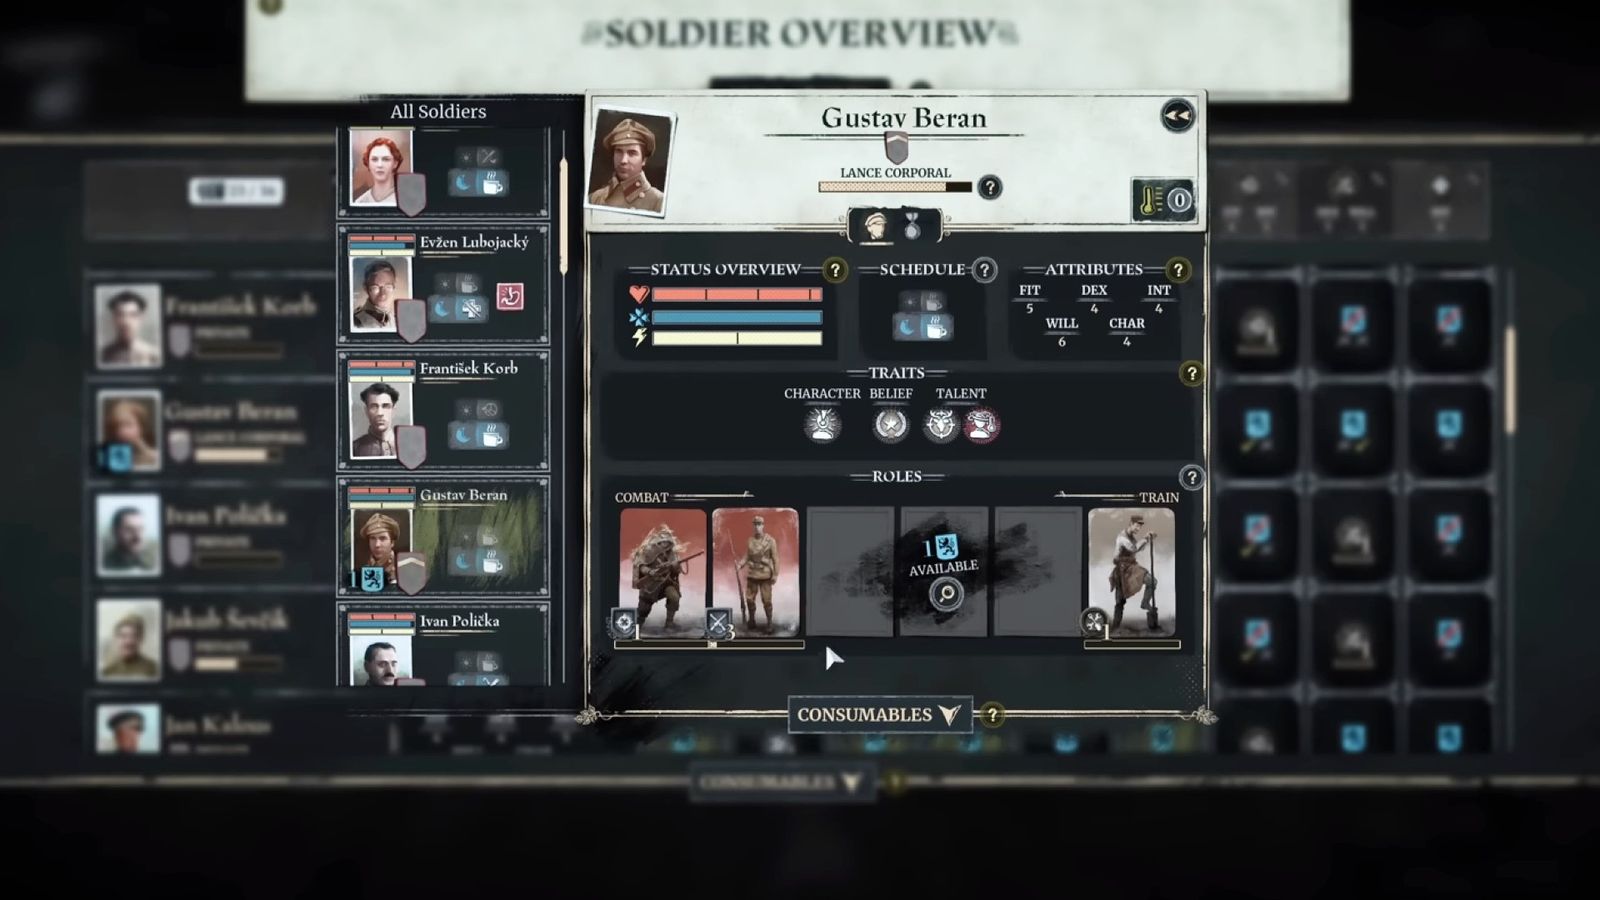 Last Train Home - screenshot of the Soldier Overview page